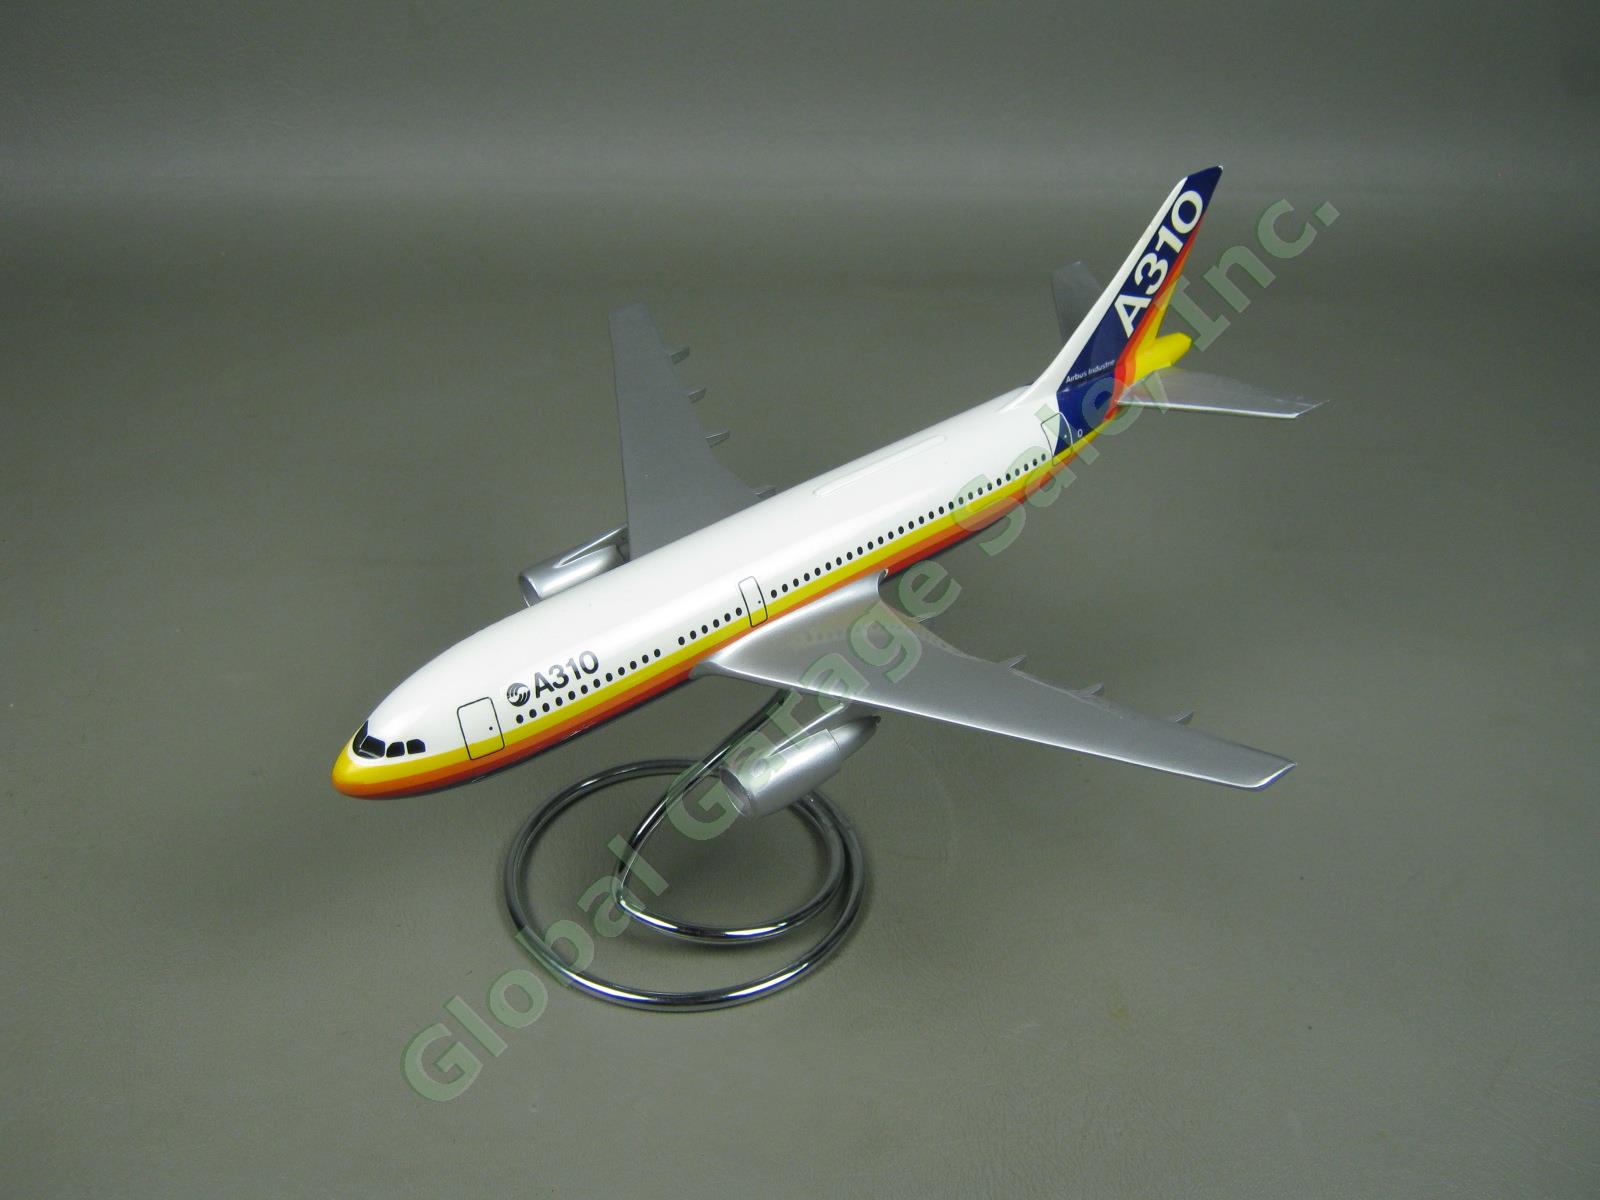 Airbus Industrie A310-203 Desktop Display Model Airline Aircraft Airplane 9.25" 1